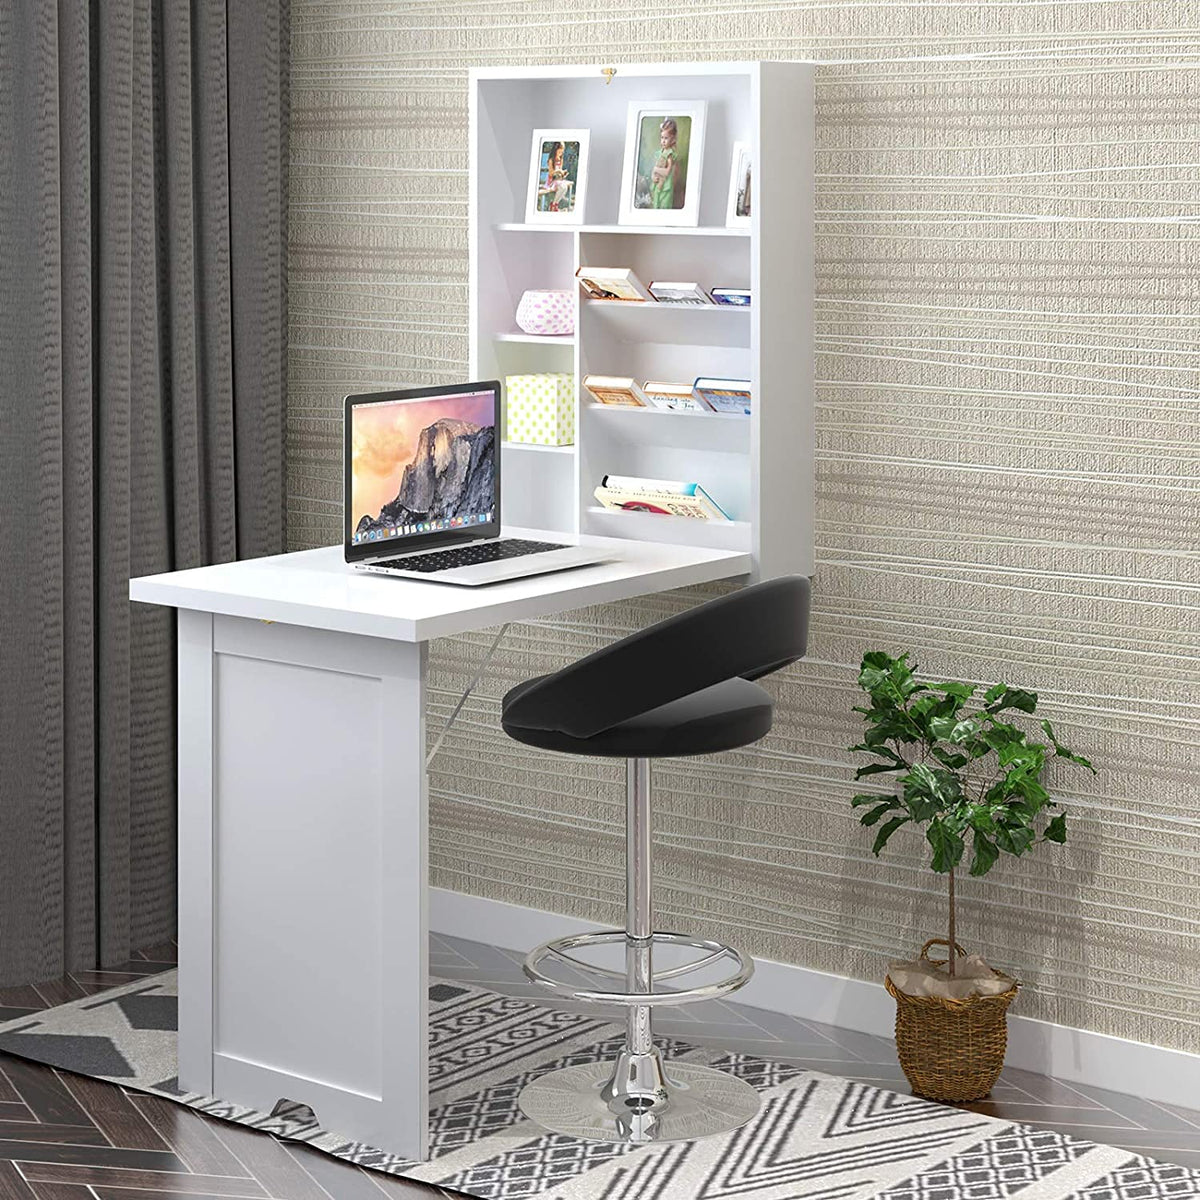 Giantex Wall Mounted Fold Out Convertible Desk, Multi-Function Floating Desk for Home Office